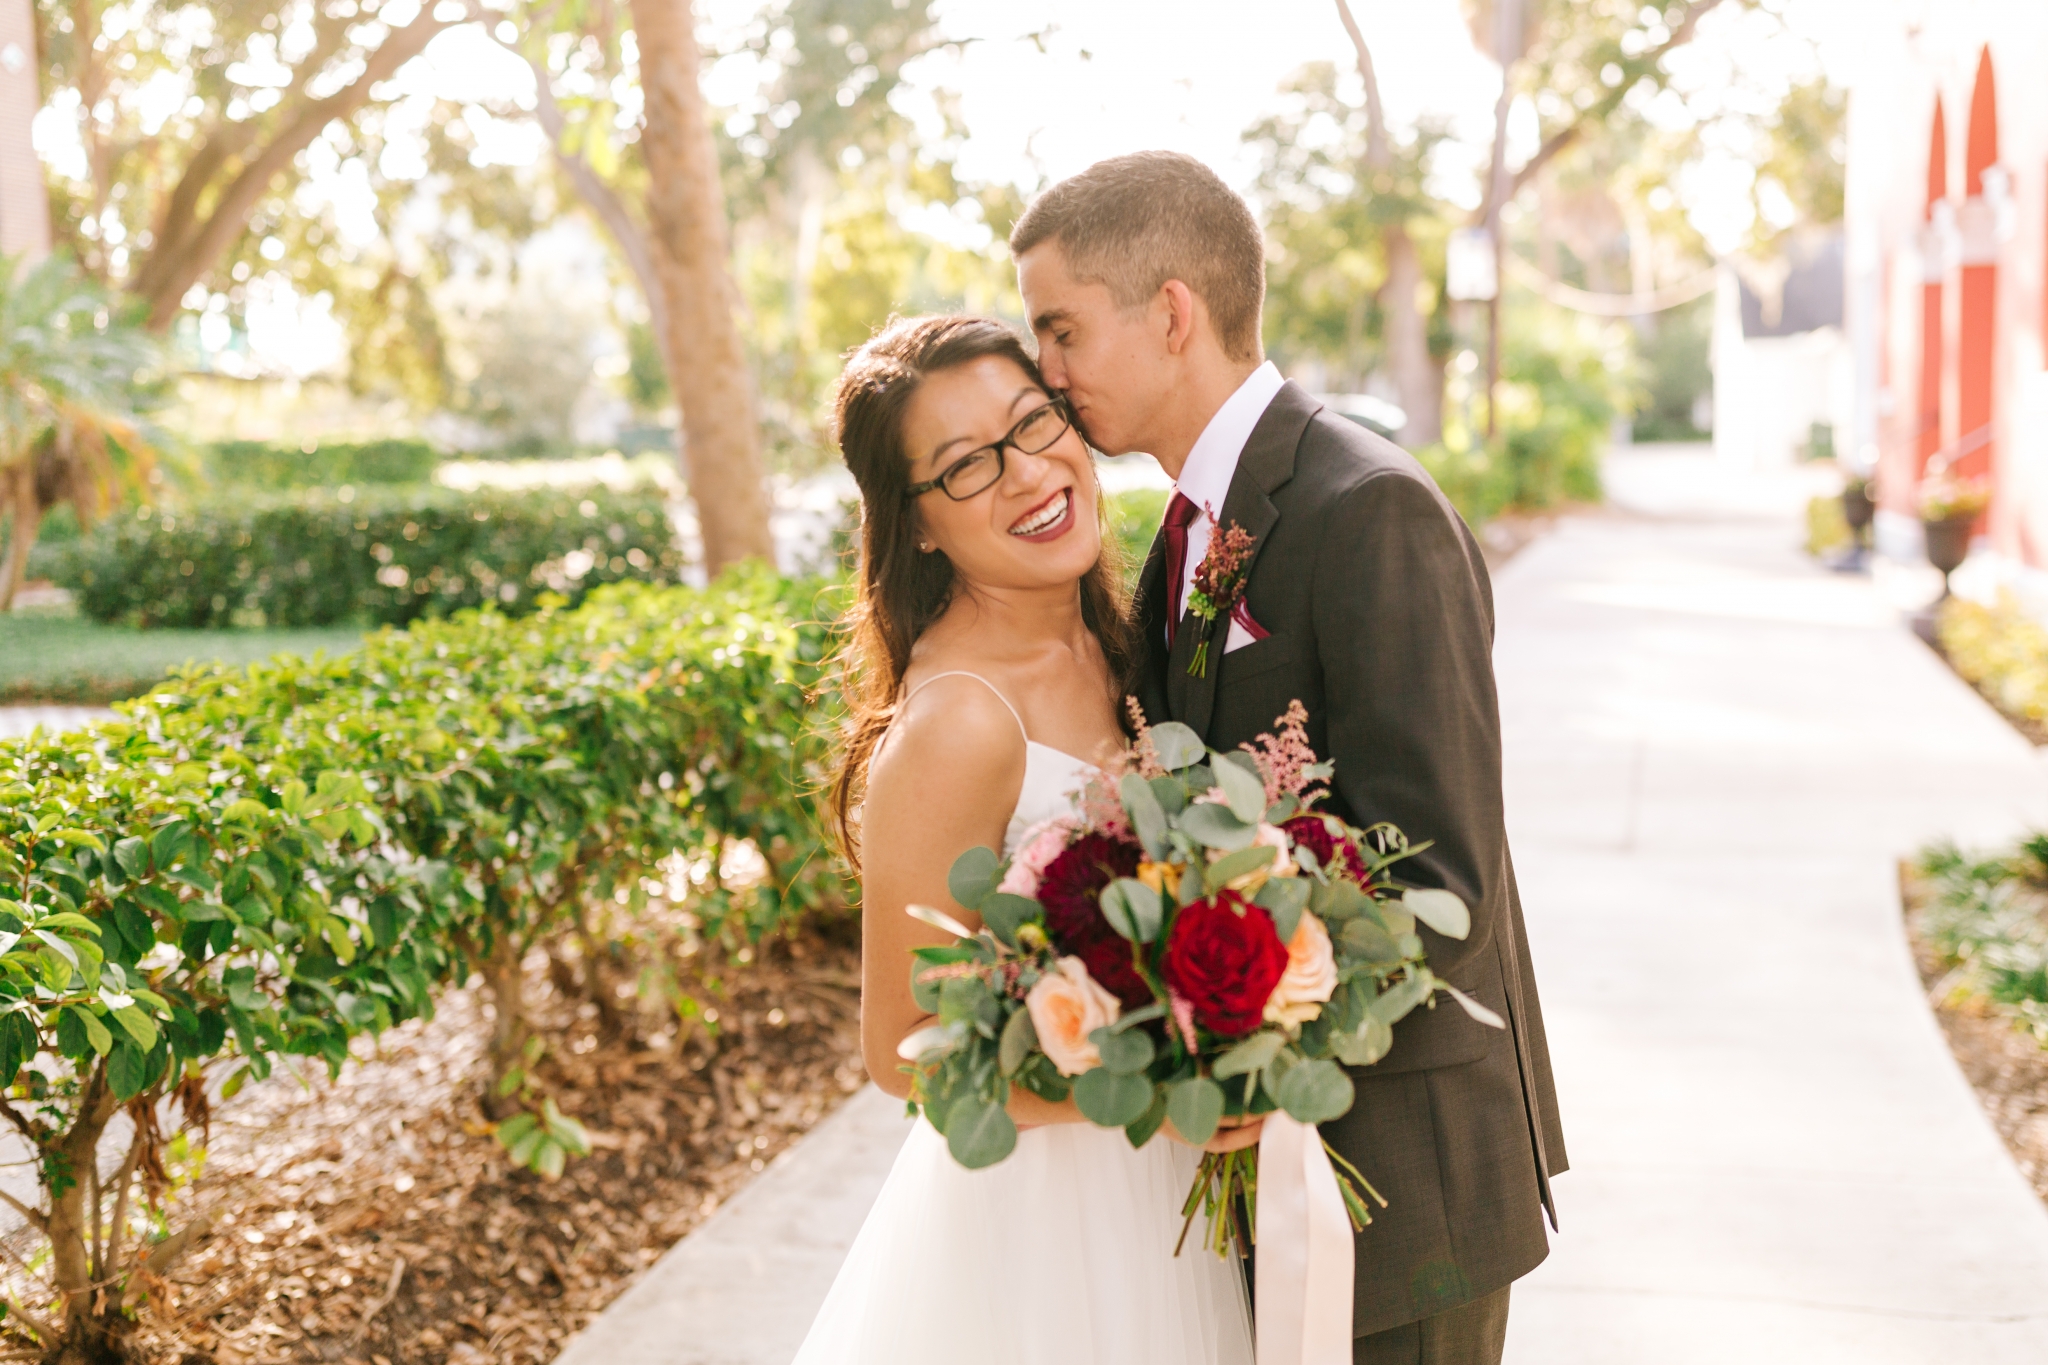 Timeless Wedding At The Orlo Tampa With Emily And Teddy